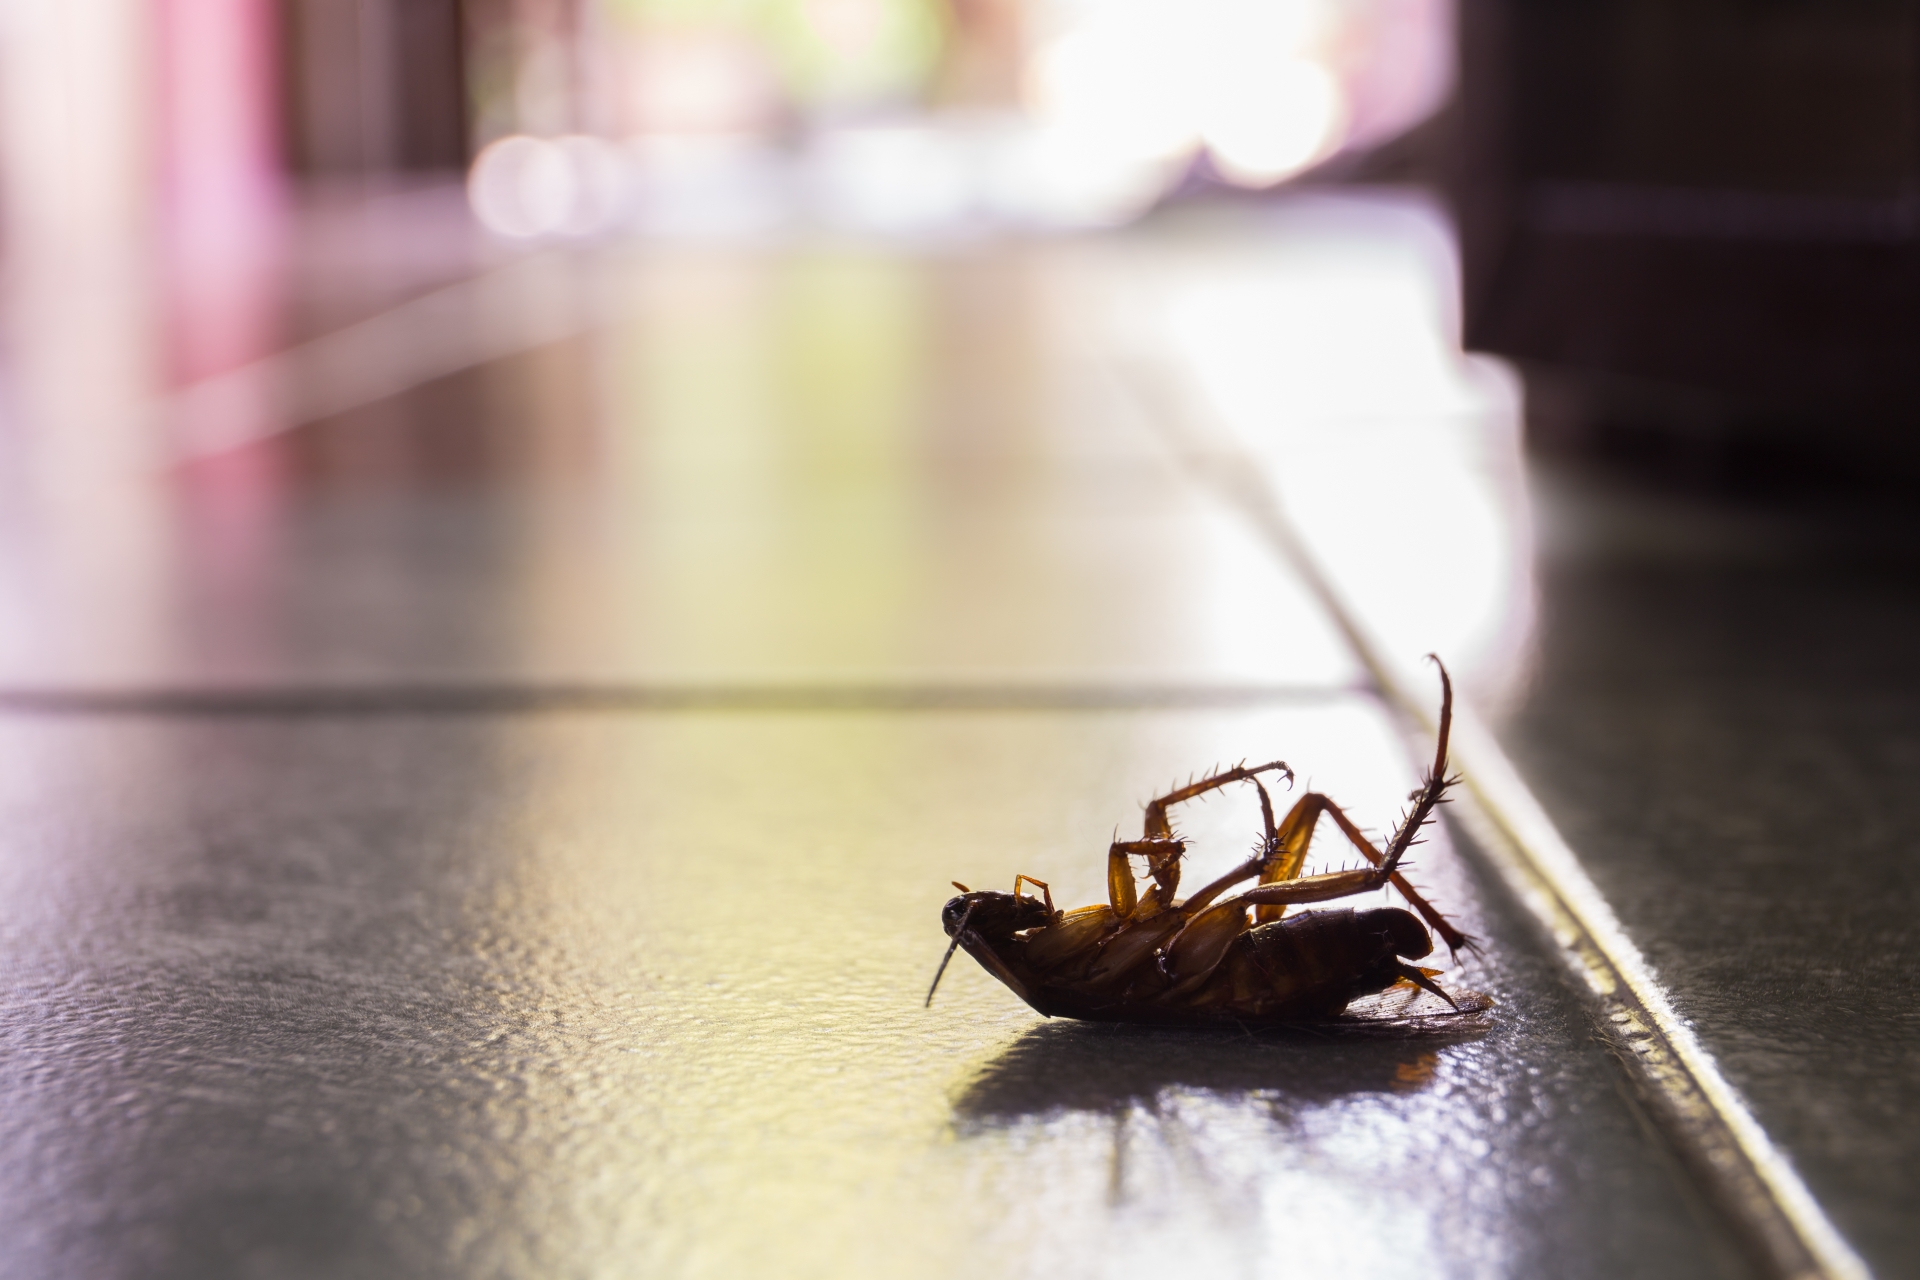 Cockroach Control, Pest Control in Raynes Park, South Wimbledon, SW20. Call Now 020 8166 9746